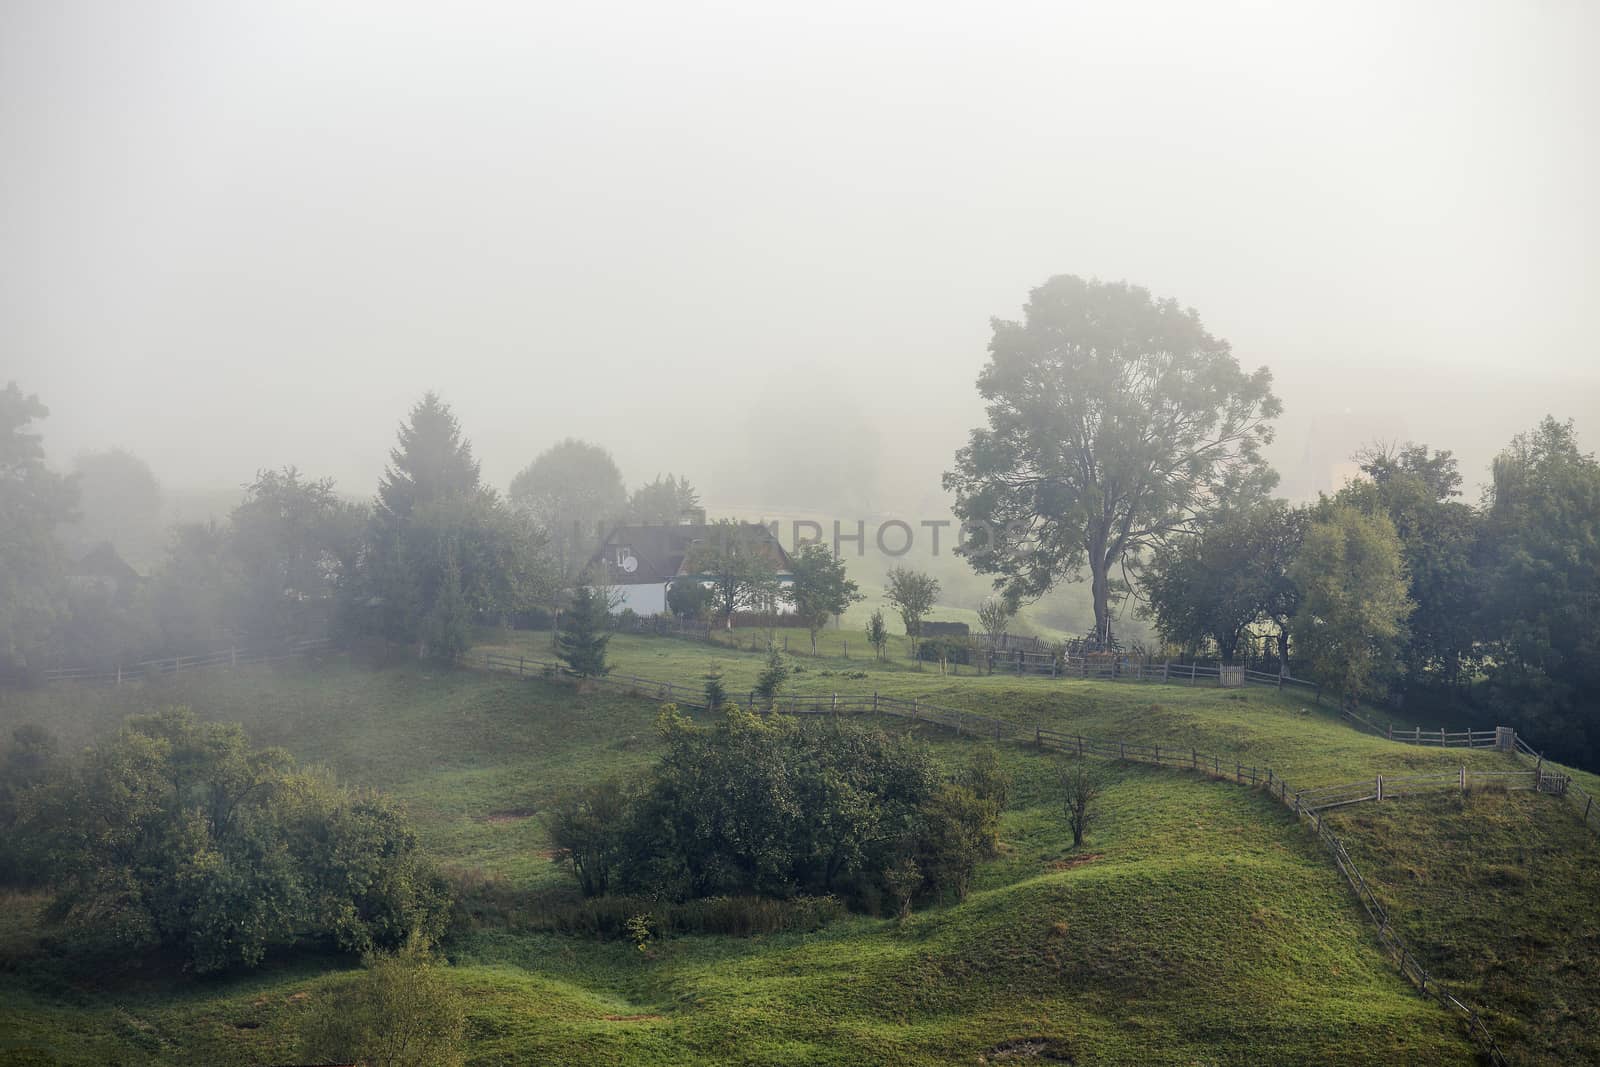 Foggy morning in a village on the hills by weise_maxim